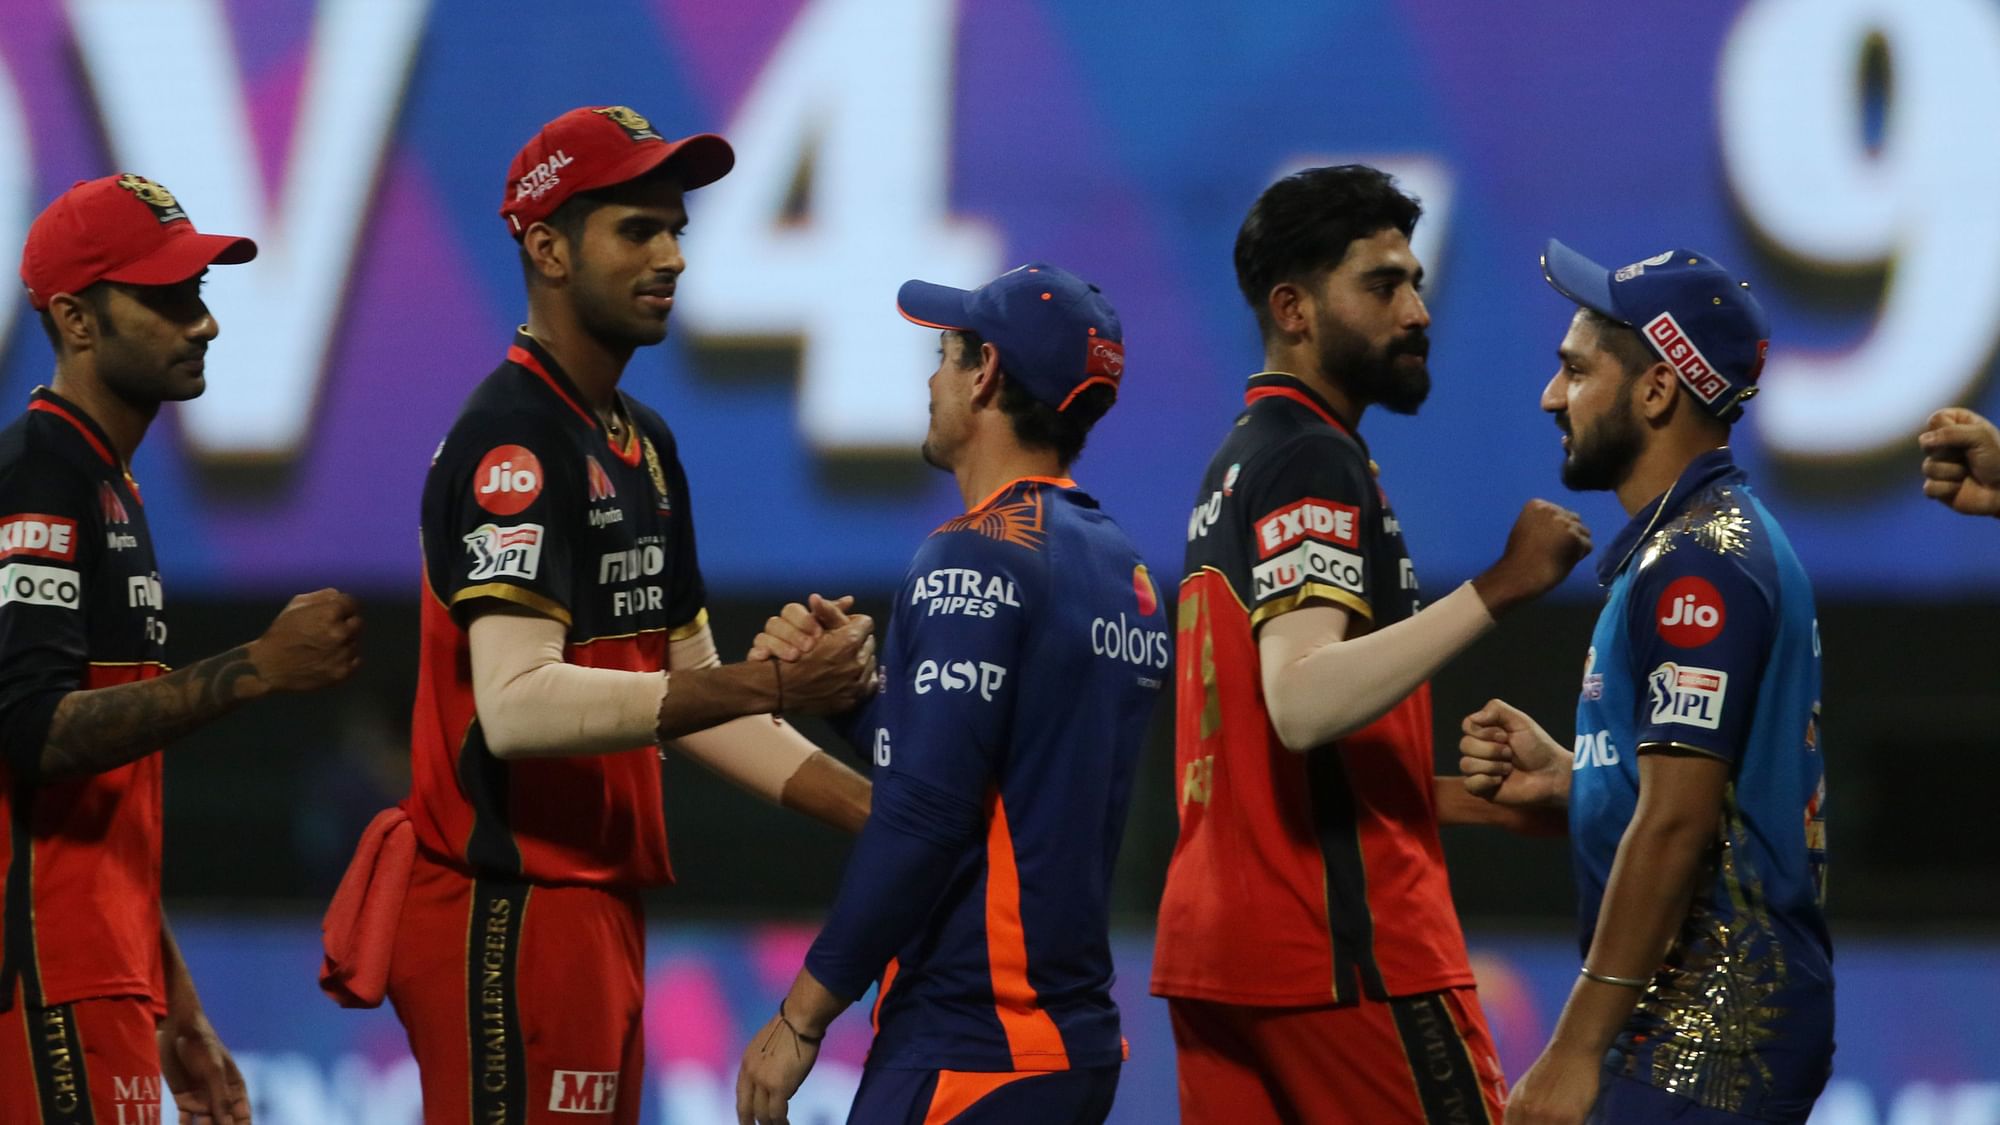 Mumbai Indians beat Royal Challengers Bangalore by 5 wickets in match 48 of IPL 2020.